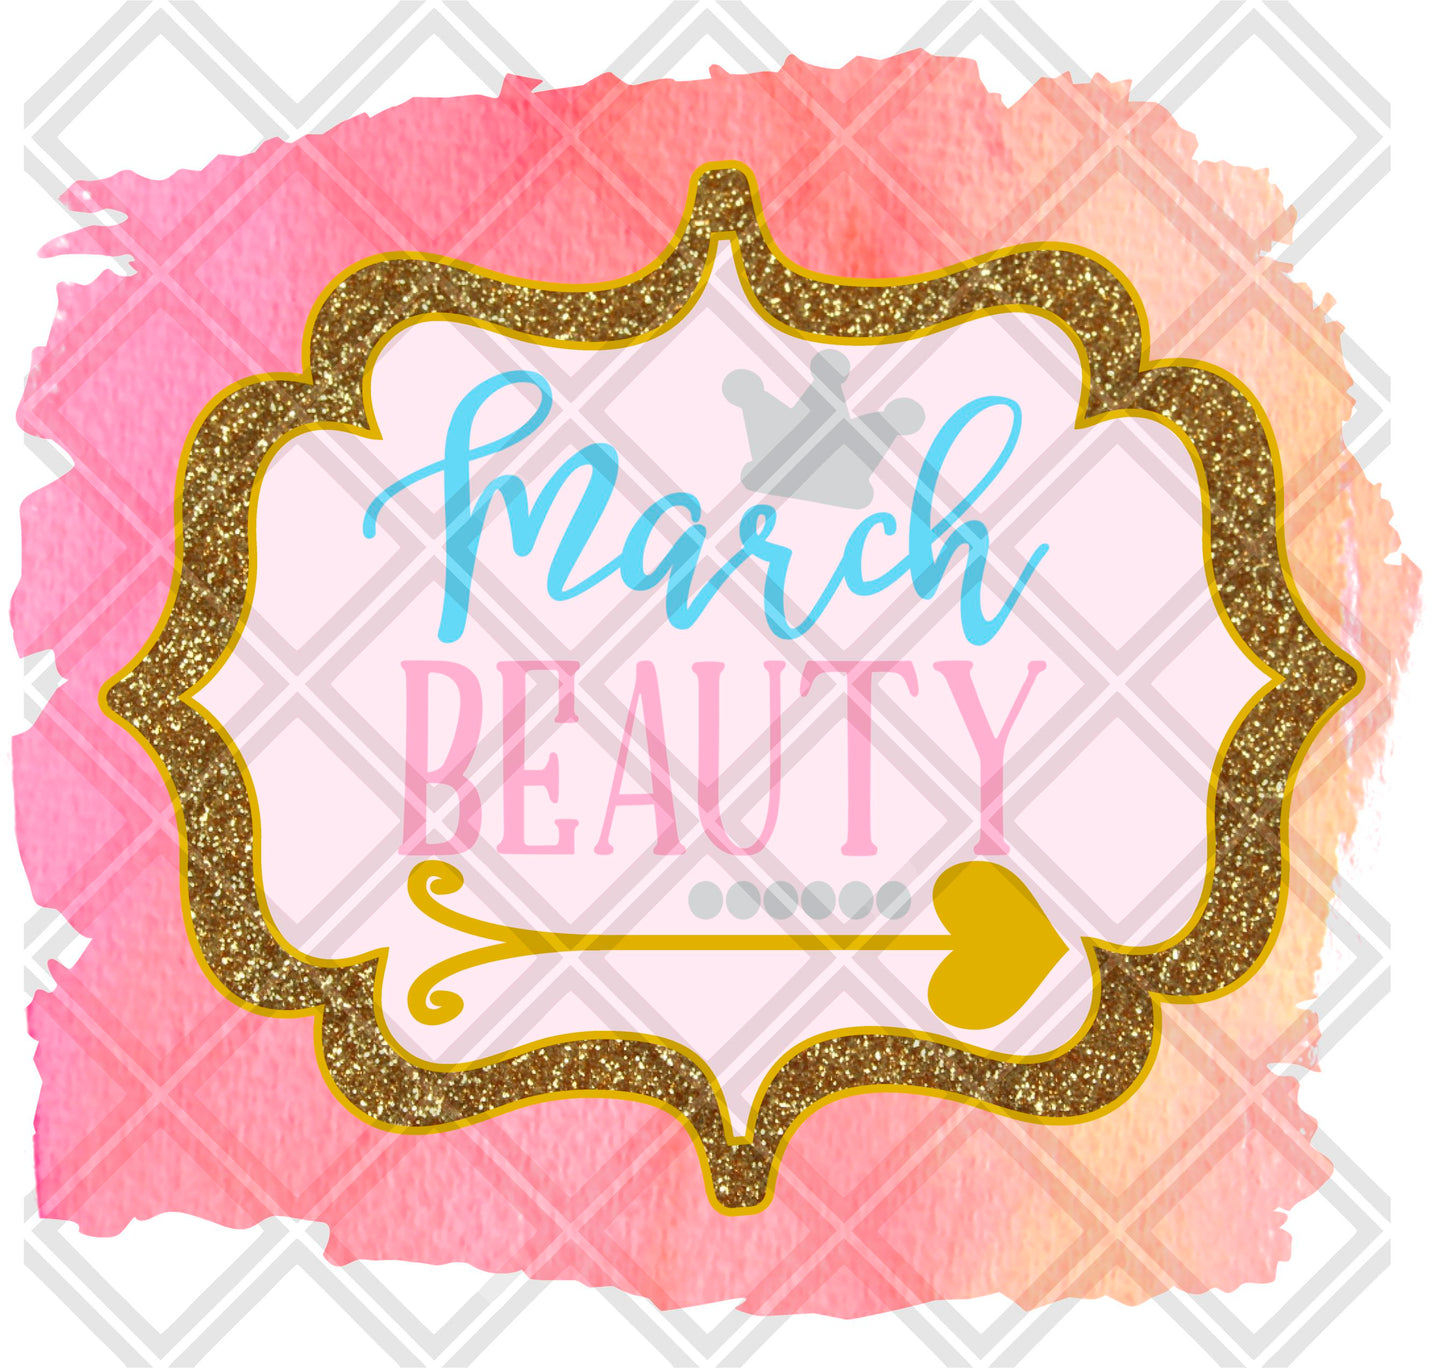 MARCH BEAUTY MONTH png Digital Download Instand Download